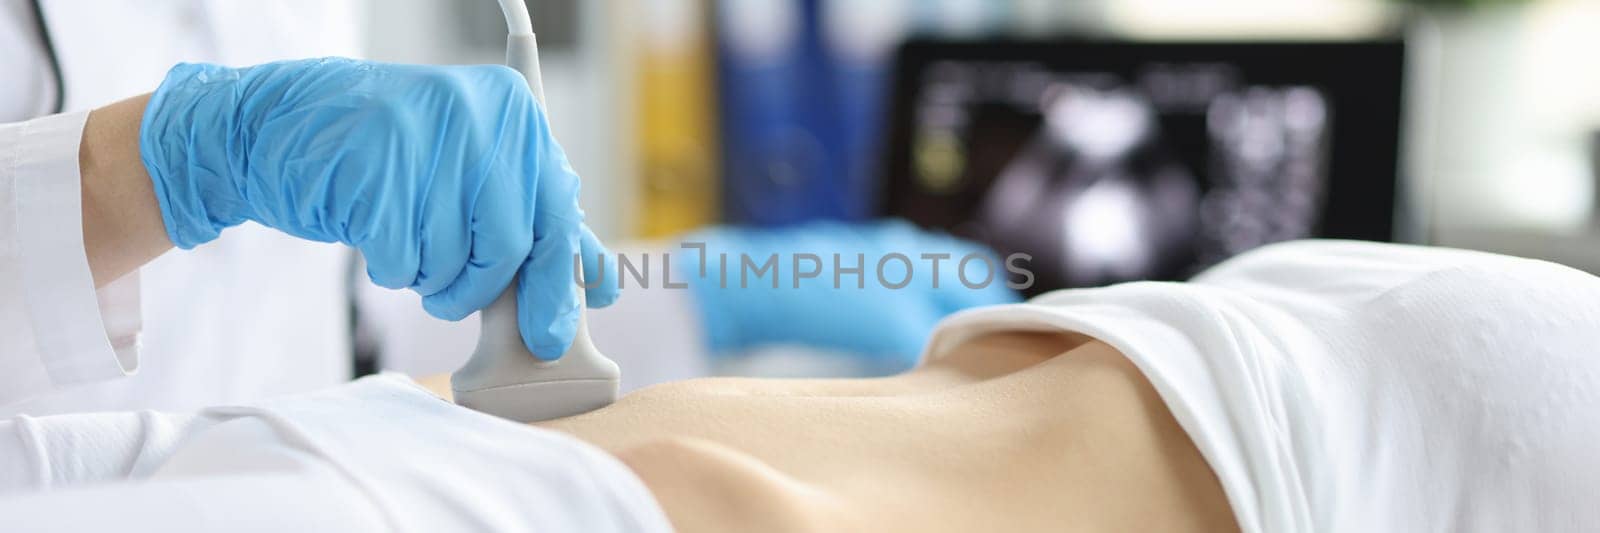 Sonographer technician holds ultrasound probe to diagnose condition of pregnant woman looking at woman uterus on computer screen. Ultrasound of uterus and female reproductive system concept